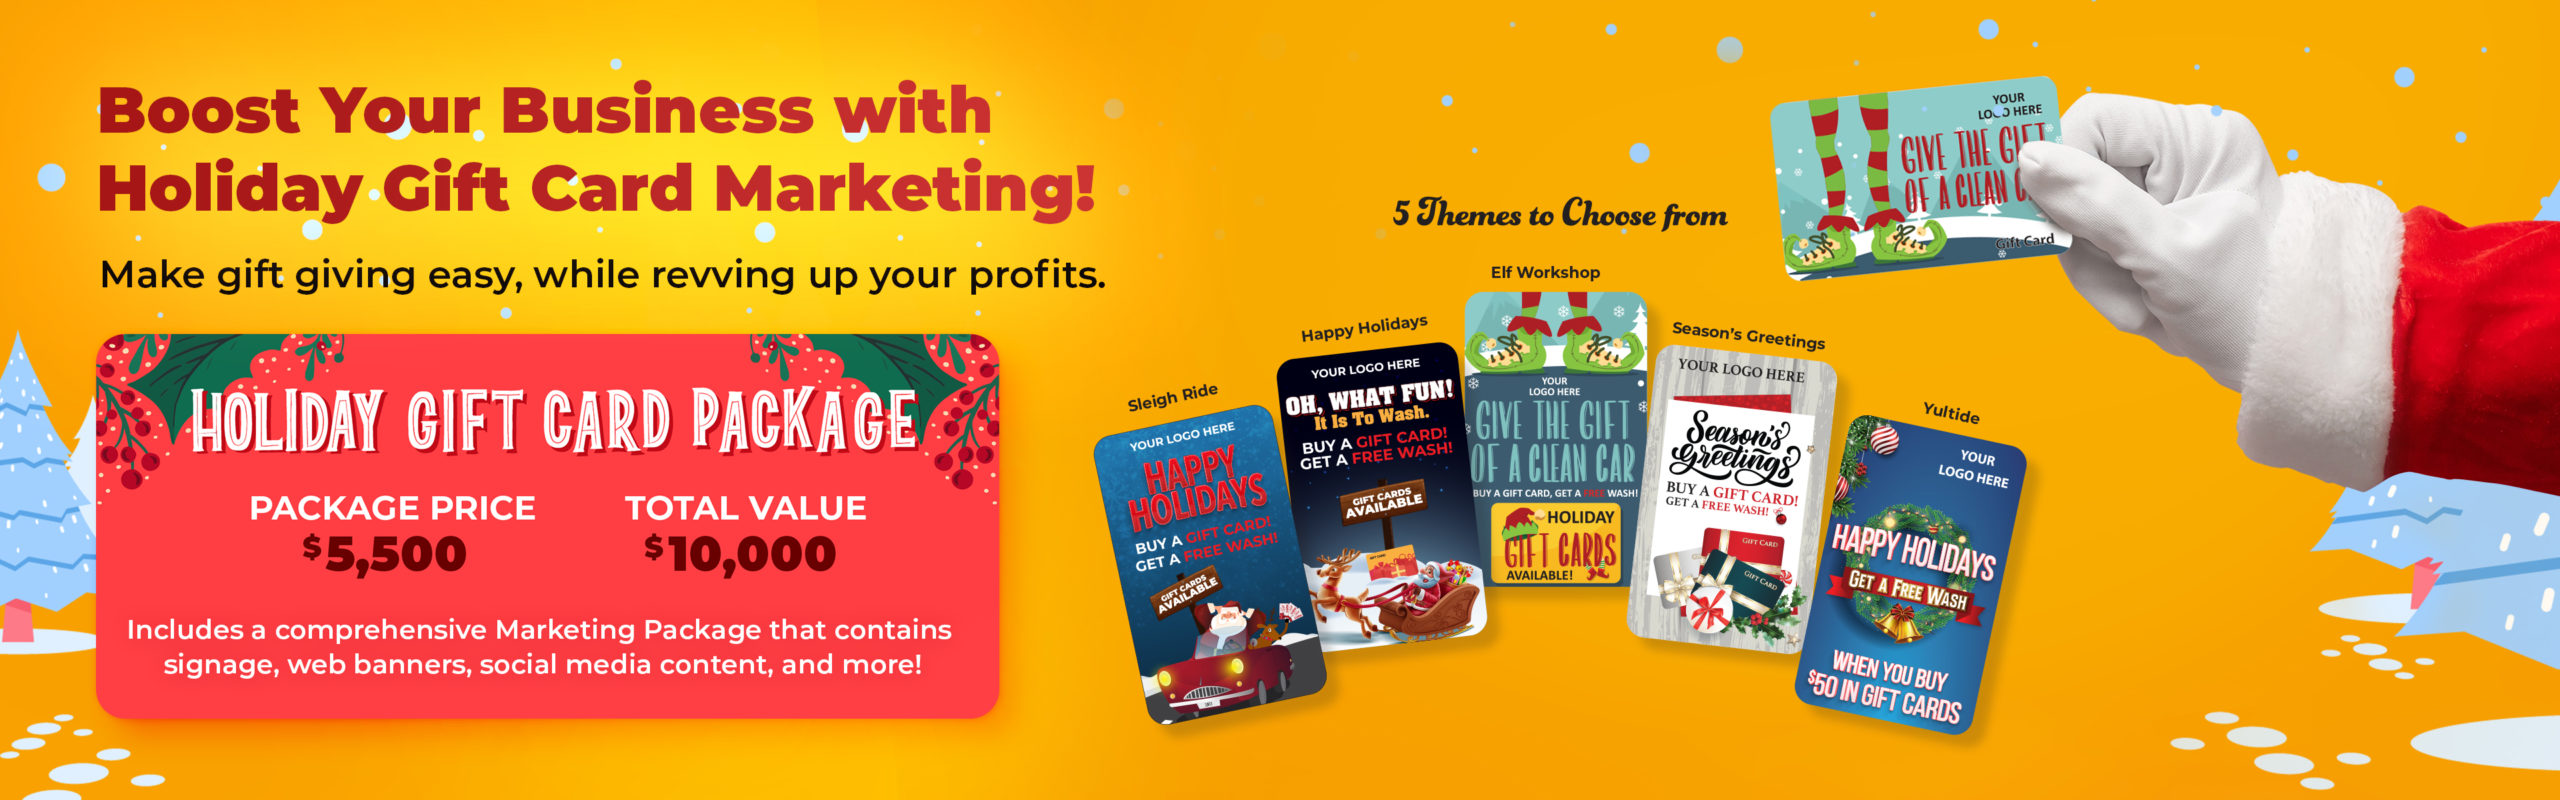 Boost Your Business with Holiday Gift Card Marketing! Make gift giving easy, while revving up your profits. GET STARTED!